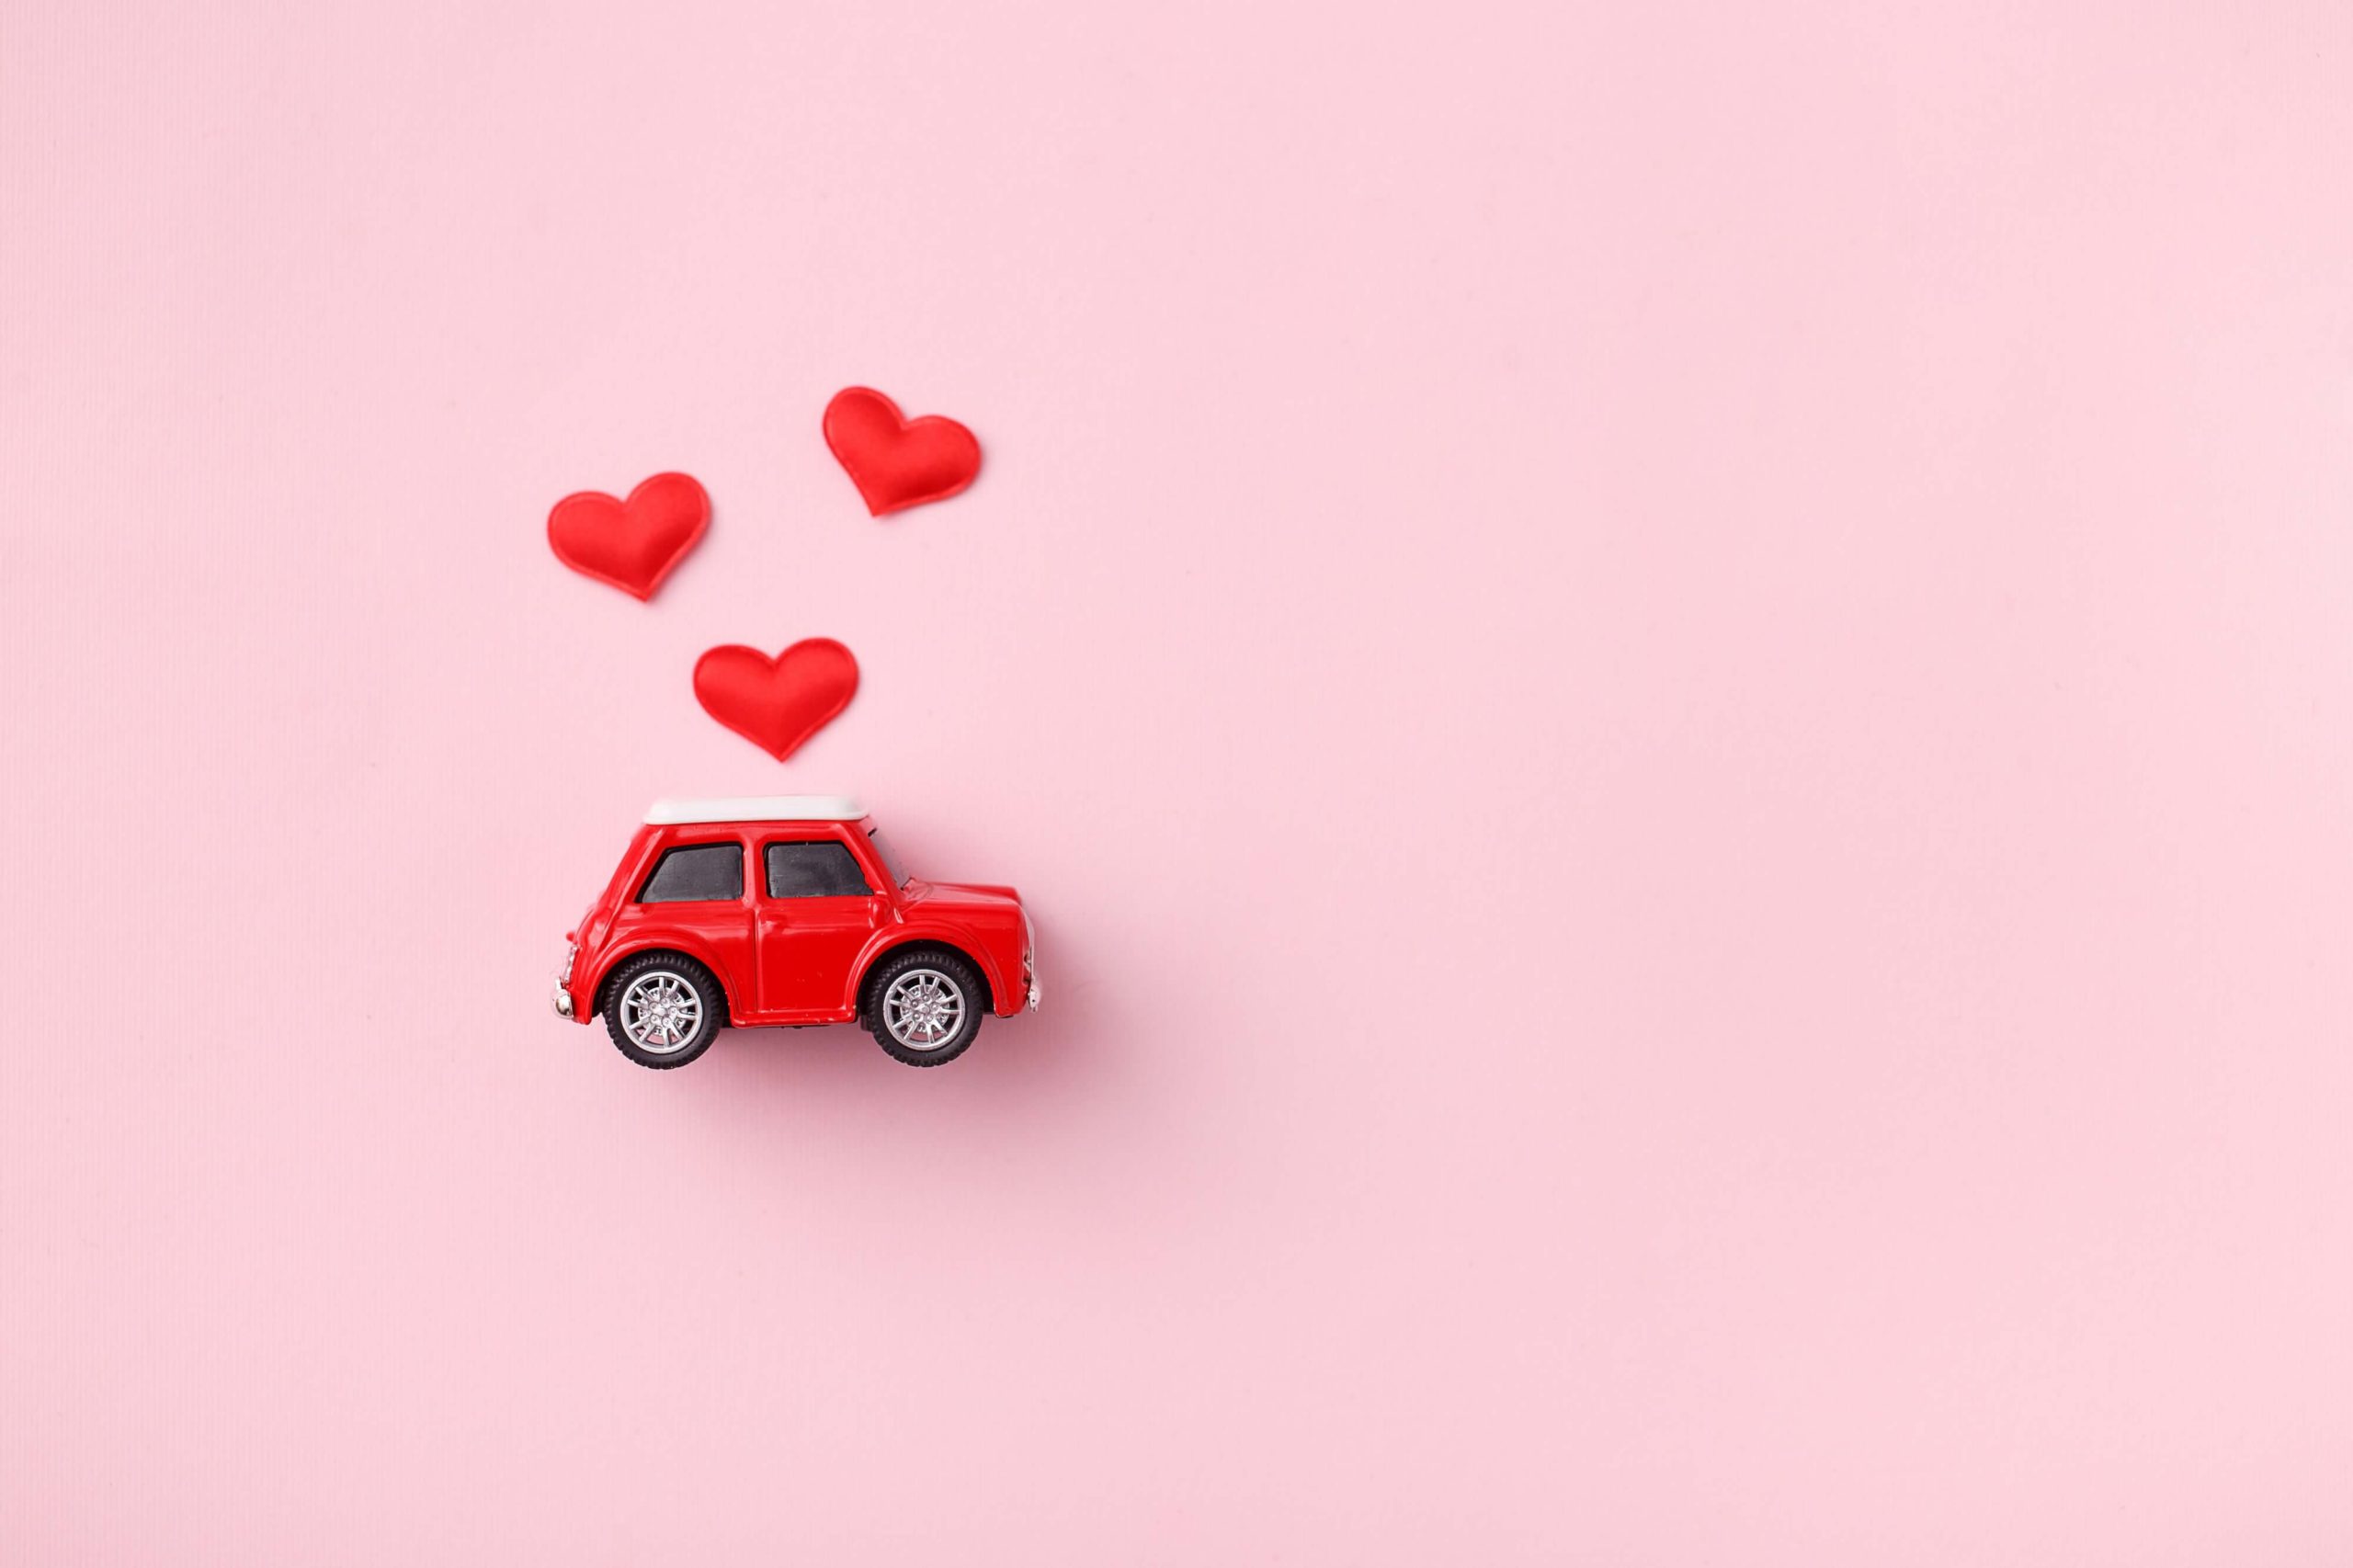 Valentine’s Day Car Related Gift Ideas